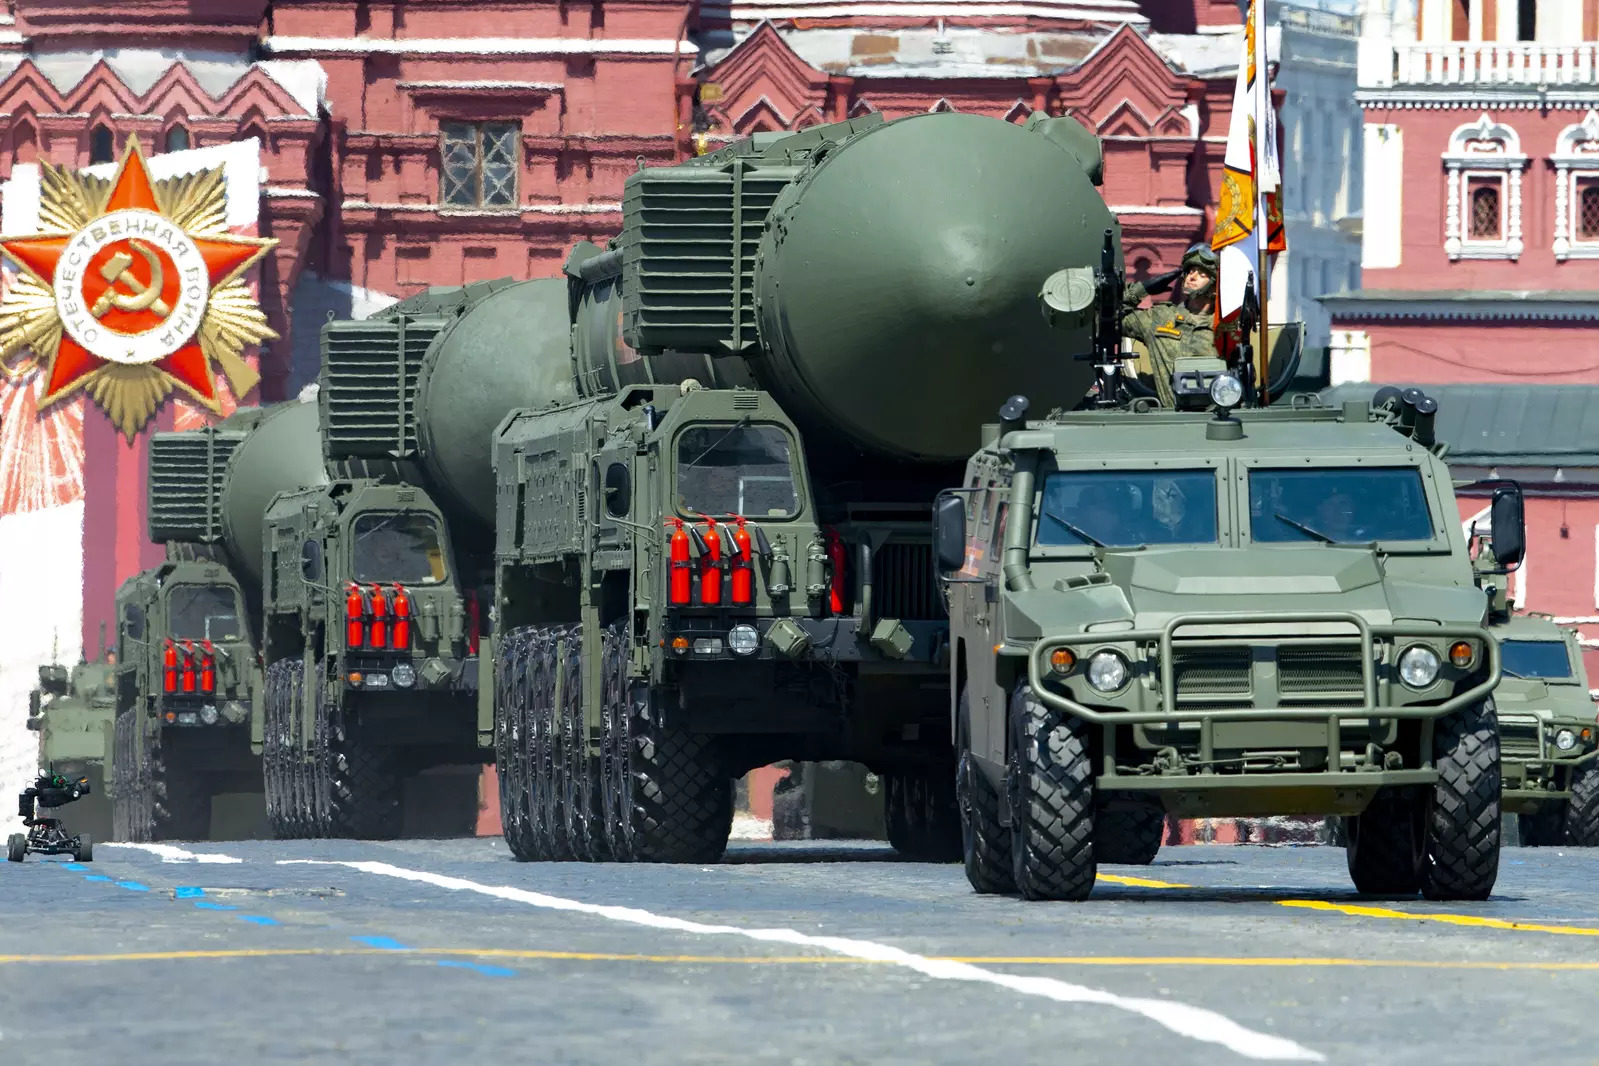 russia nuclear threats: How real are Russian President Vladimir Putin's  nuclear threats in Ukraine? - The Economic Times